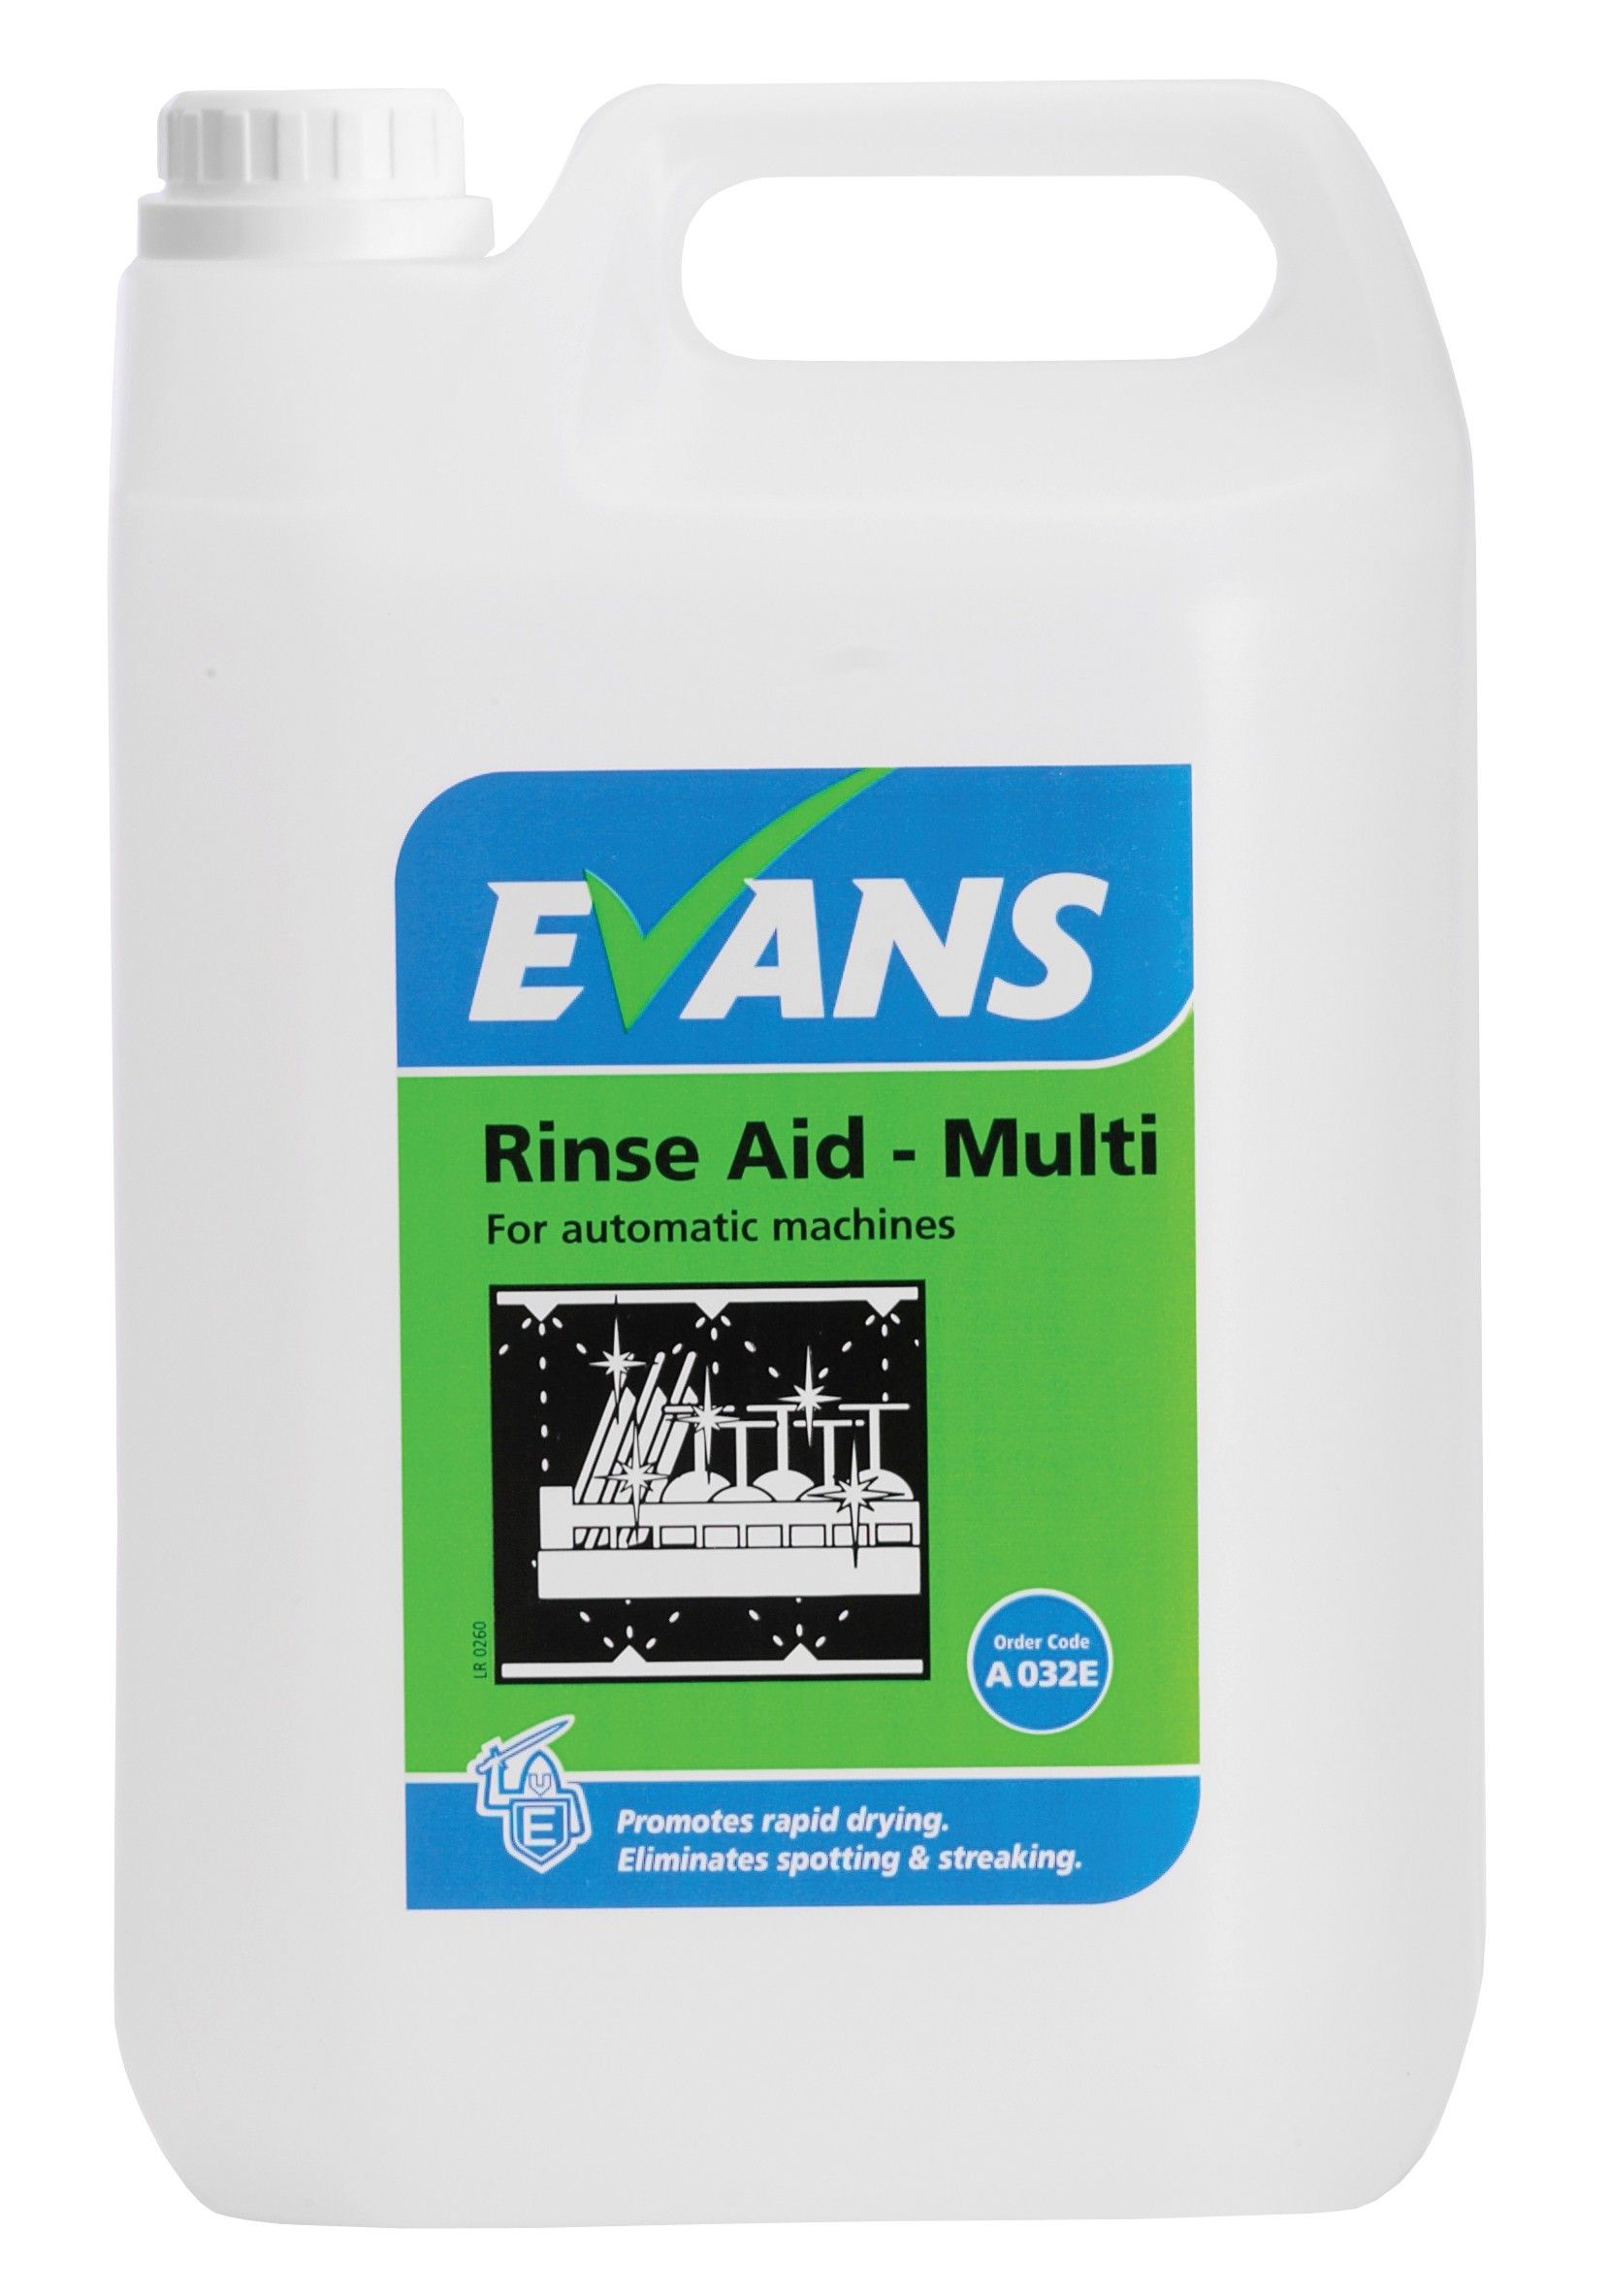 Evans Rinse Aid Multi - For Automatic Machines 5 ltr